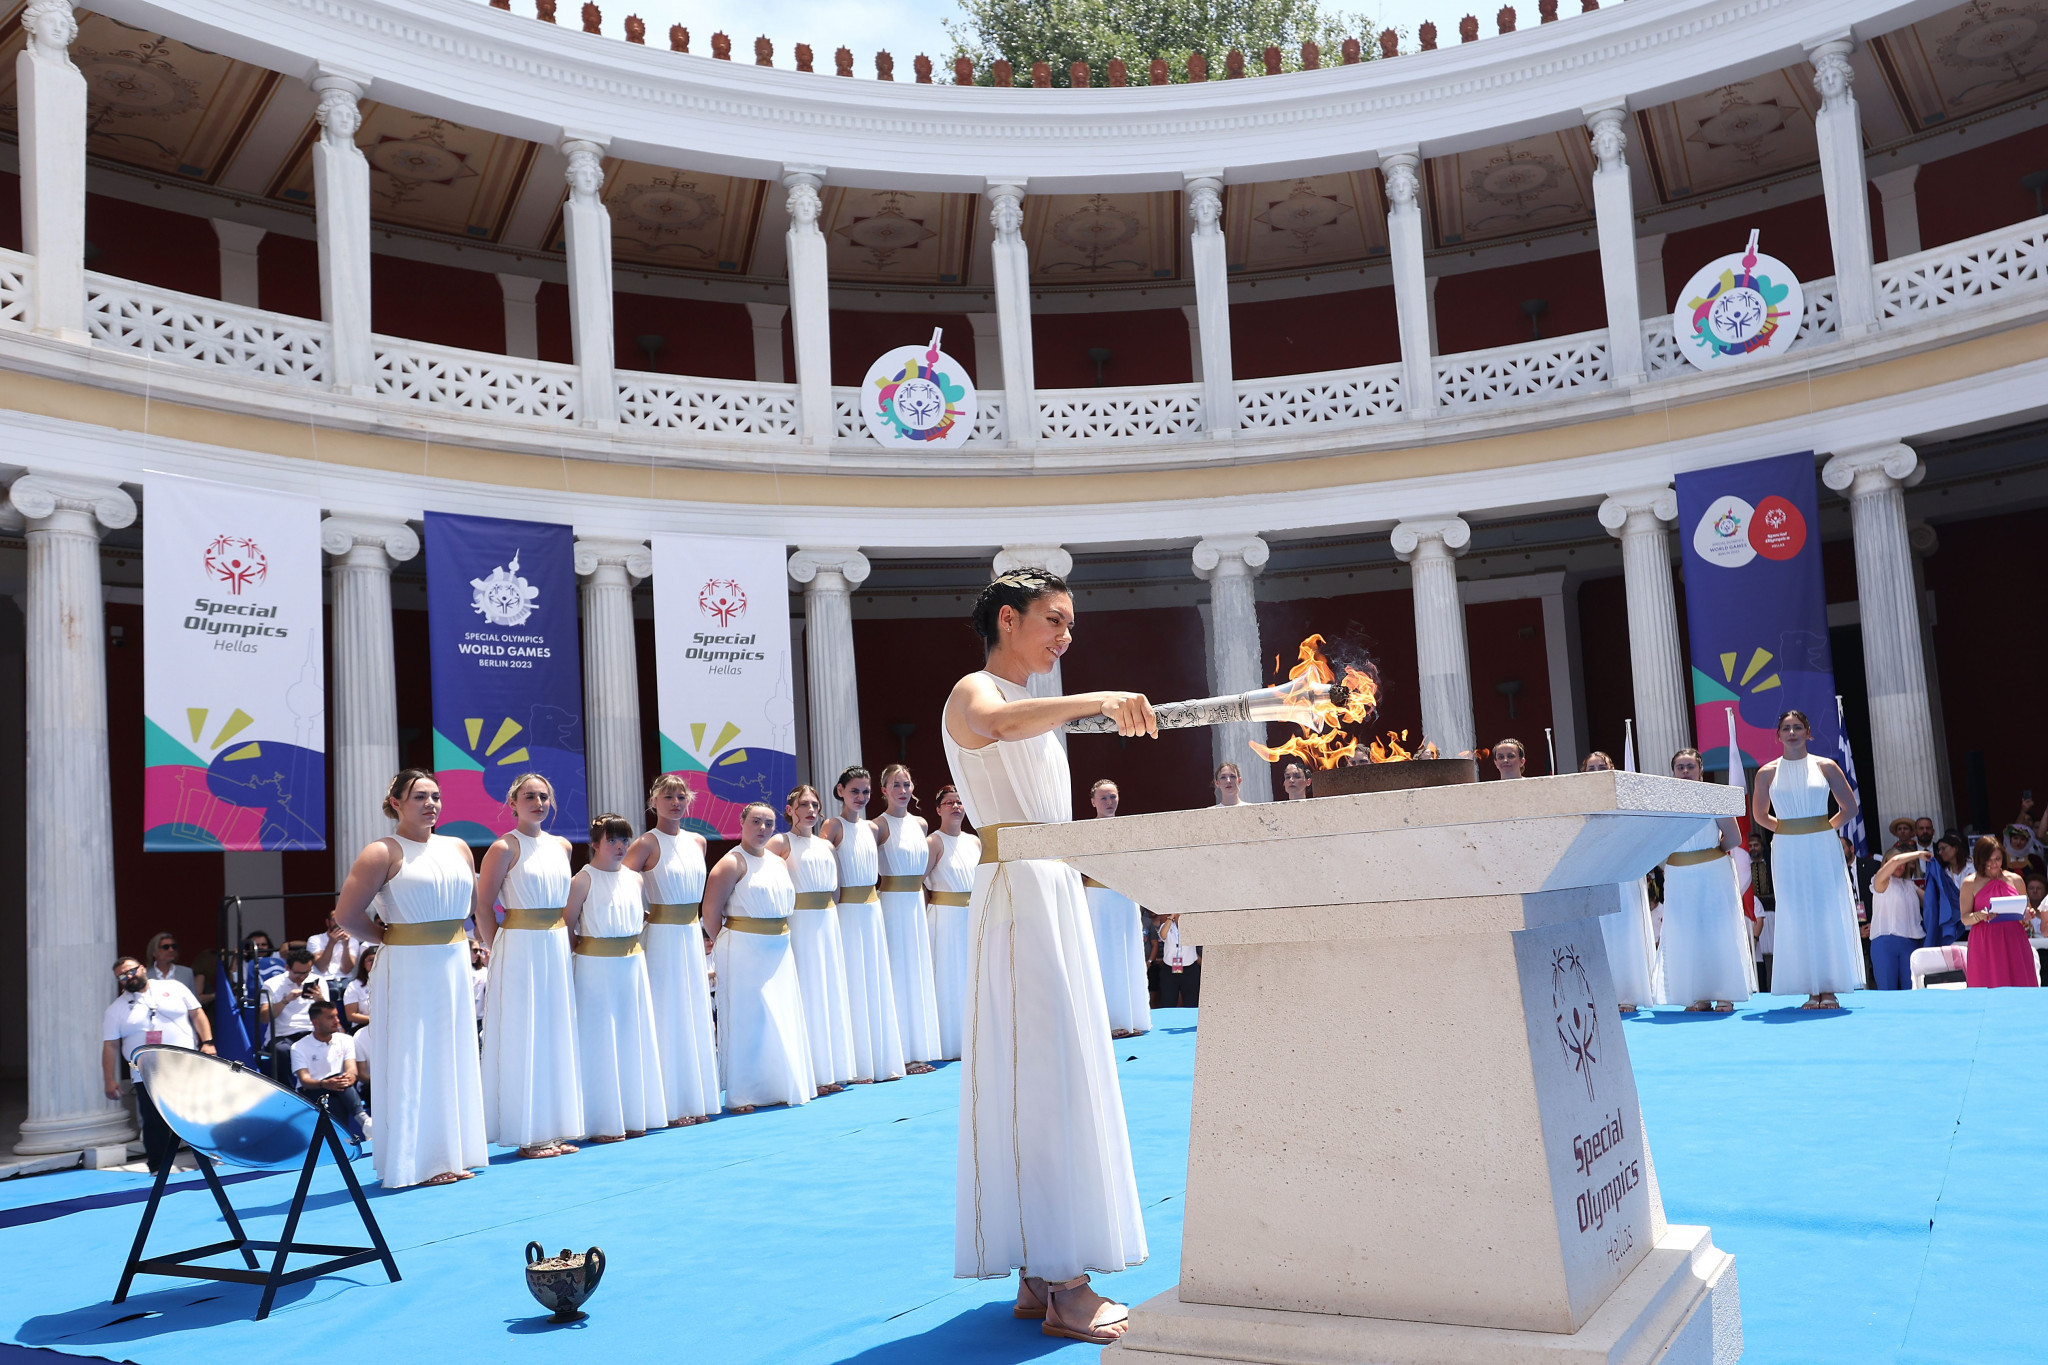 The Berlin 2023 Special Olympics World Games Torch lighting ceremony was held at Zappeion Temple in Athens, Greece, earlier this month ©Getty Images 